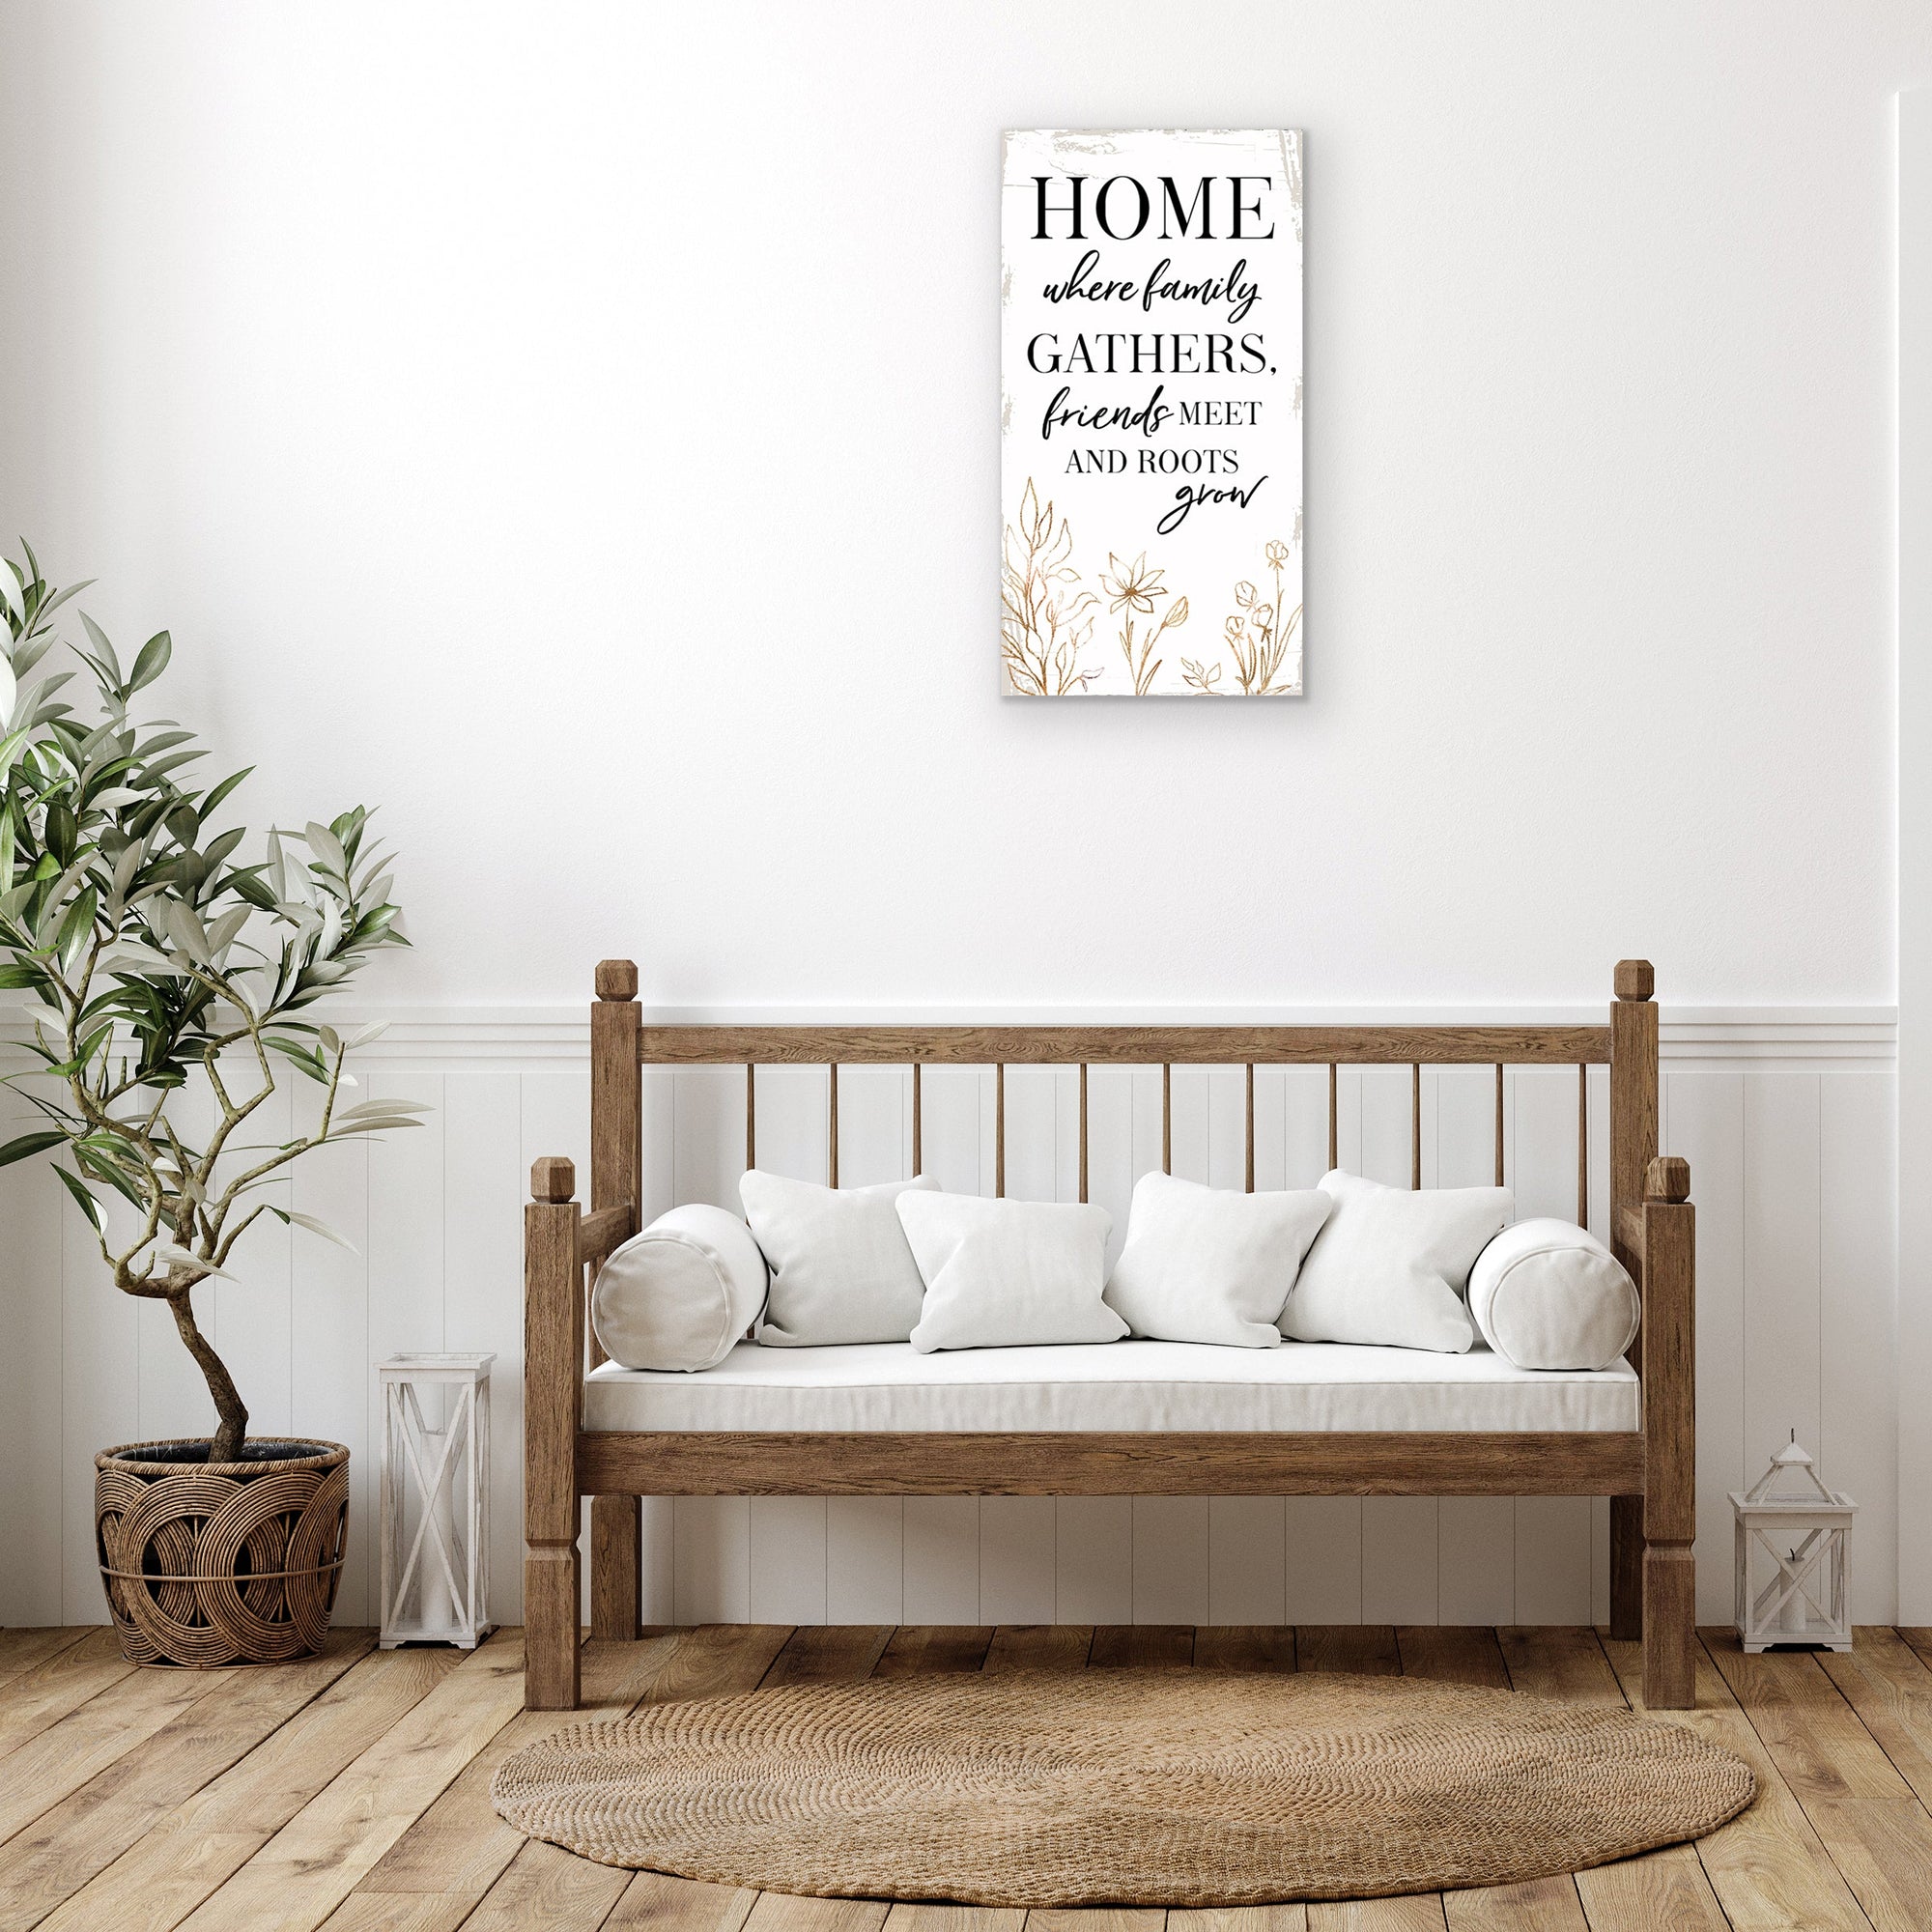 A beautifully crafted wooden wall plaque, a perfect example of wall decor gifts.